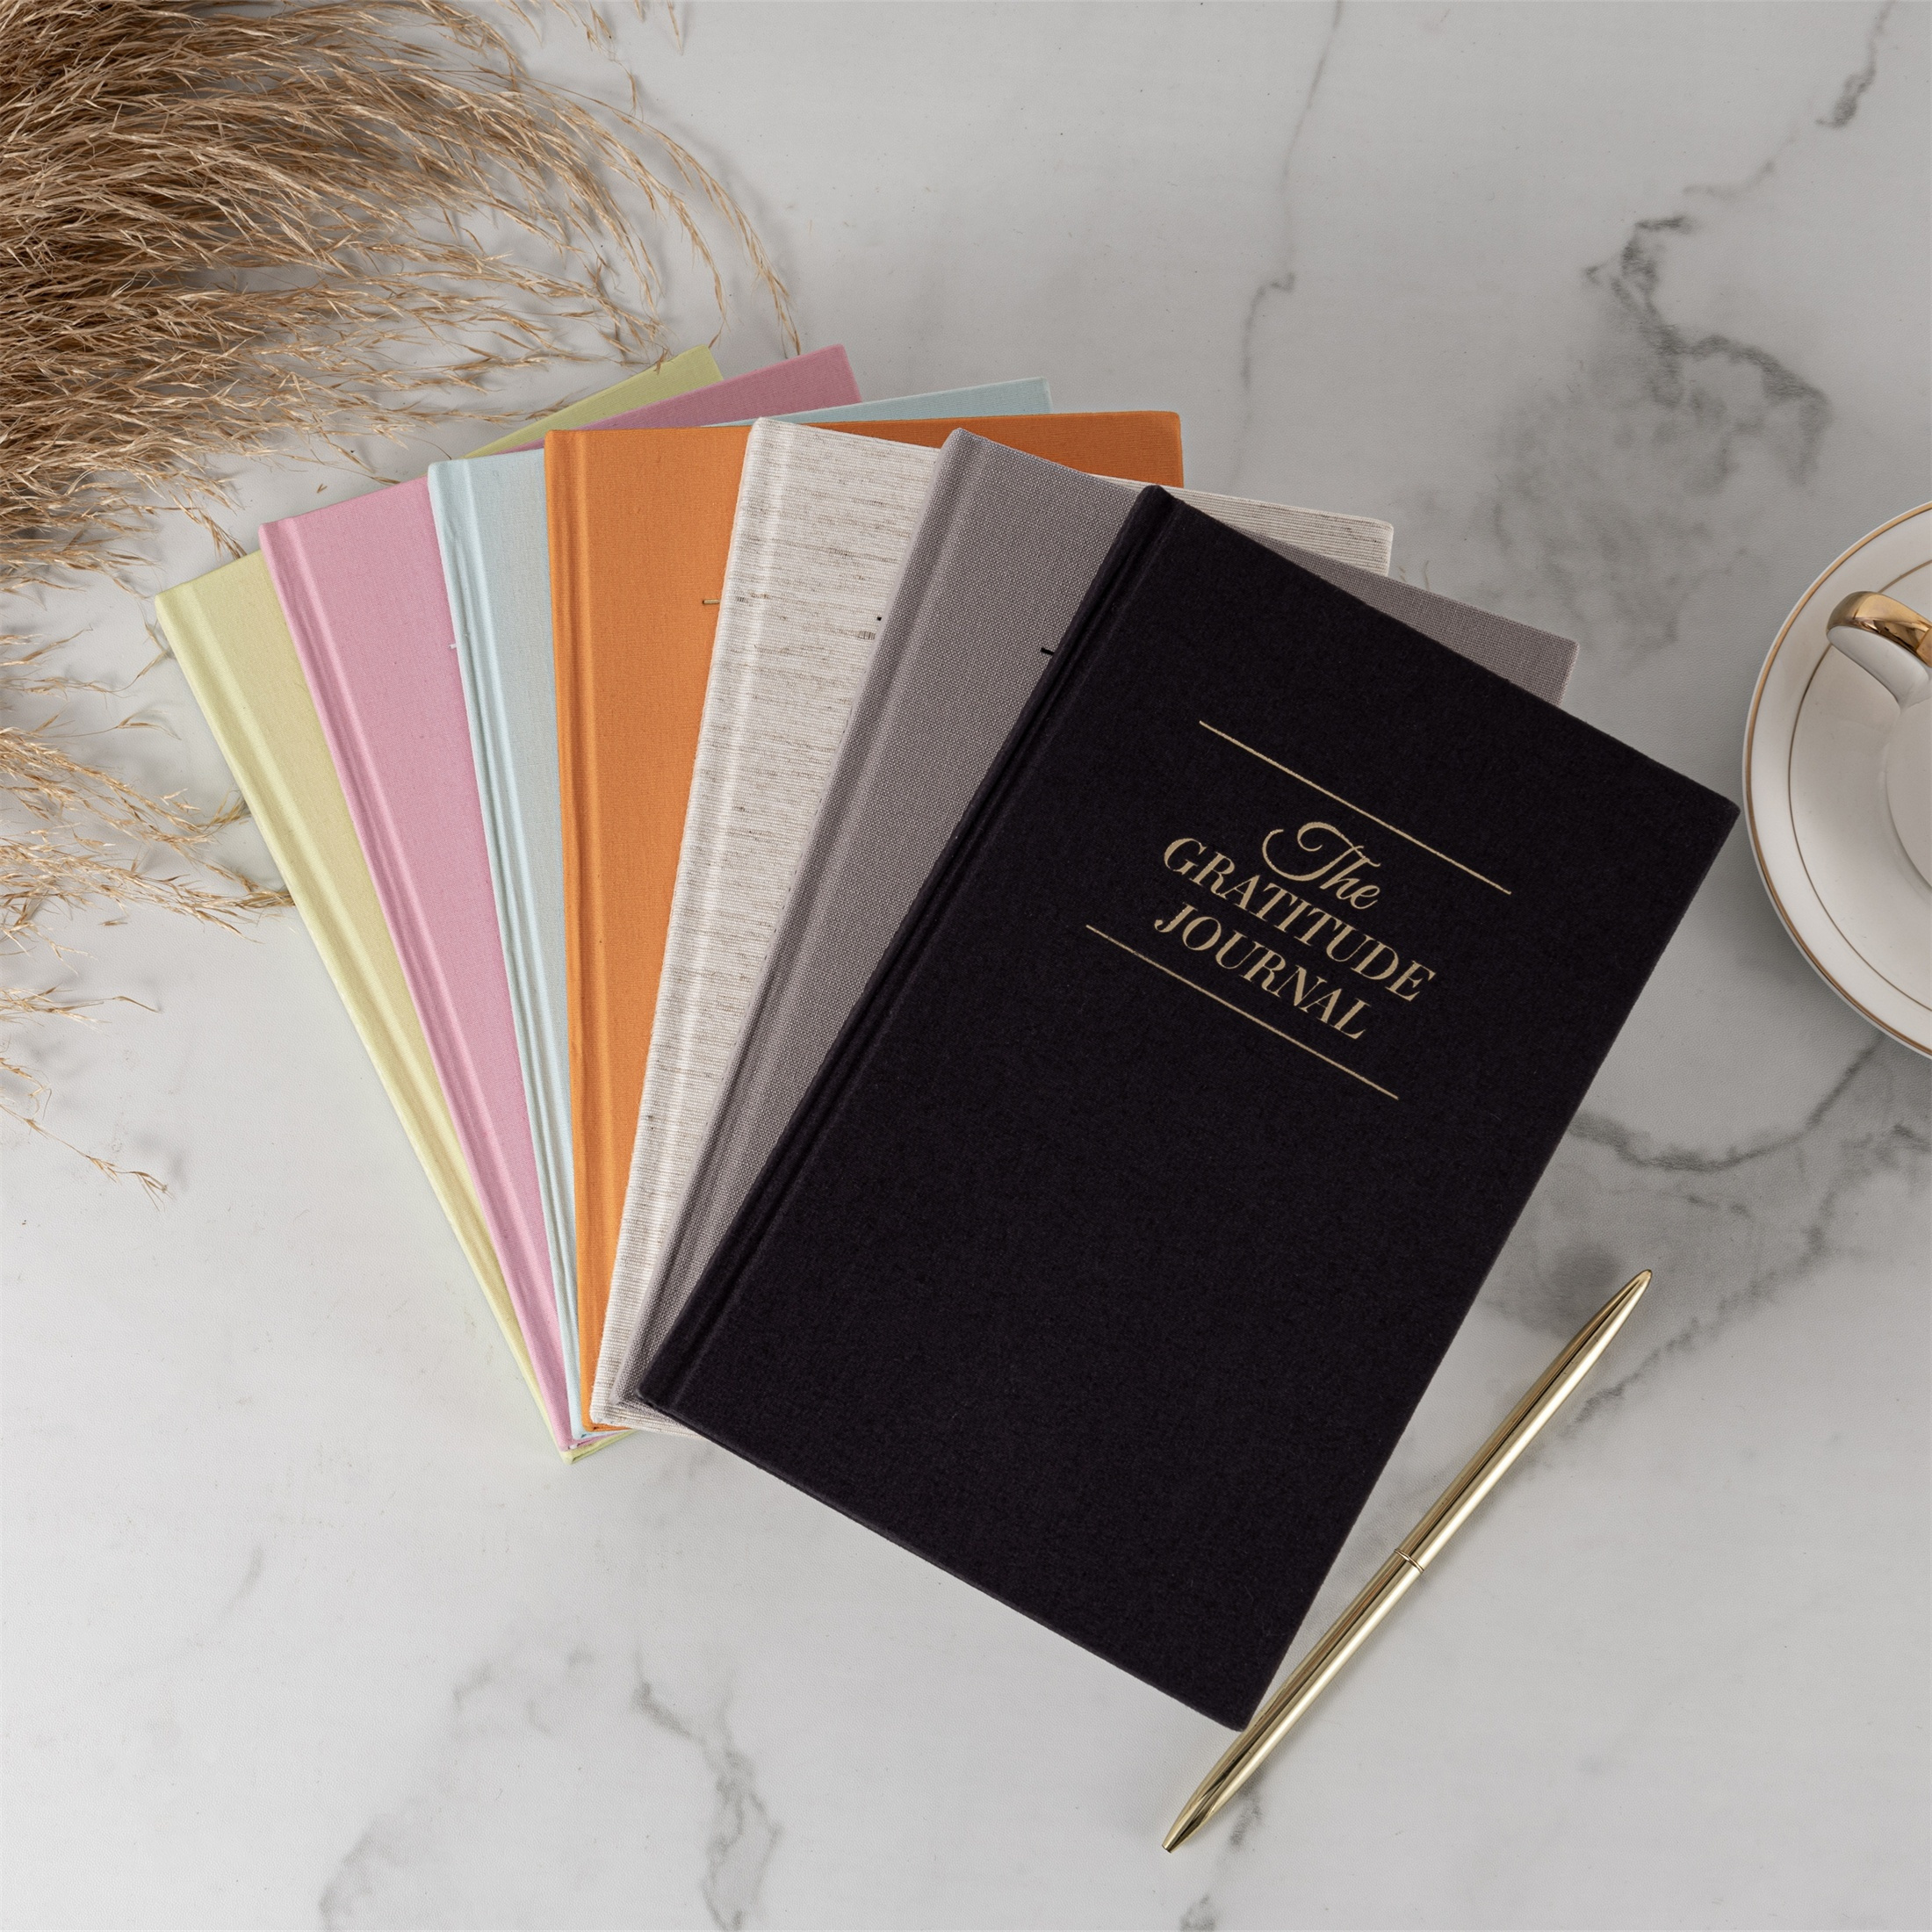 The Gratitude Journal : 5 Minute Journal - Five Minutes Daily Notebook for  More Happiness, Optimism, Affirmation & Reflection - AliExpress